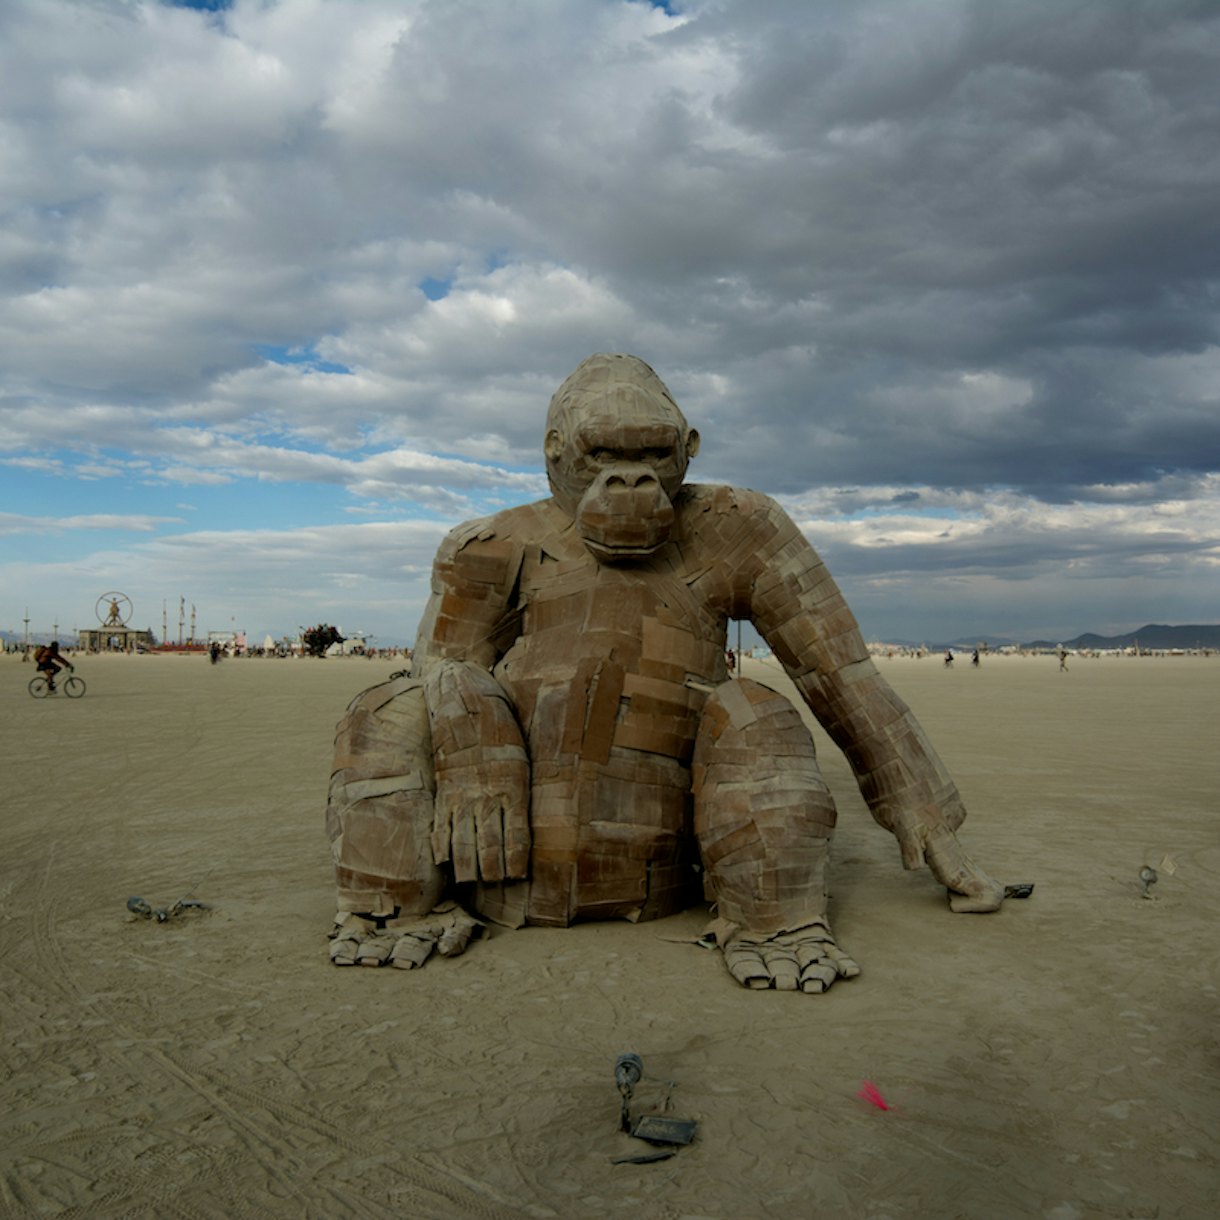 These Are The Wildest Pieces Of Art And Cars We Saw At Burning Man